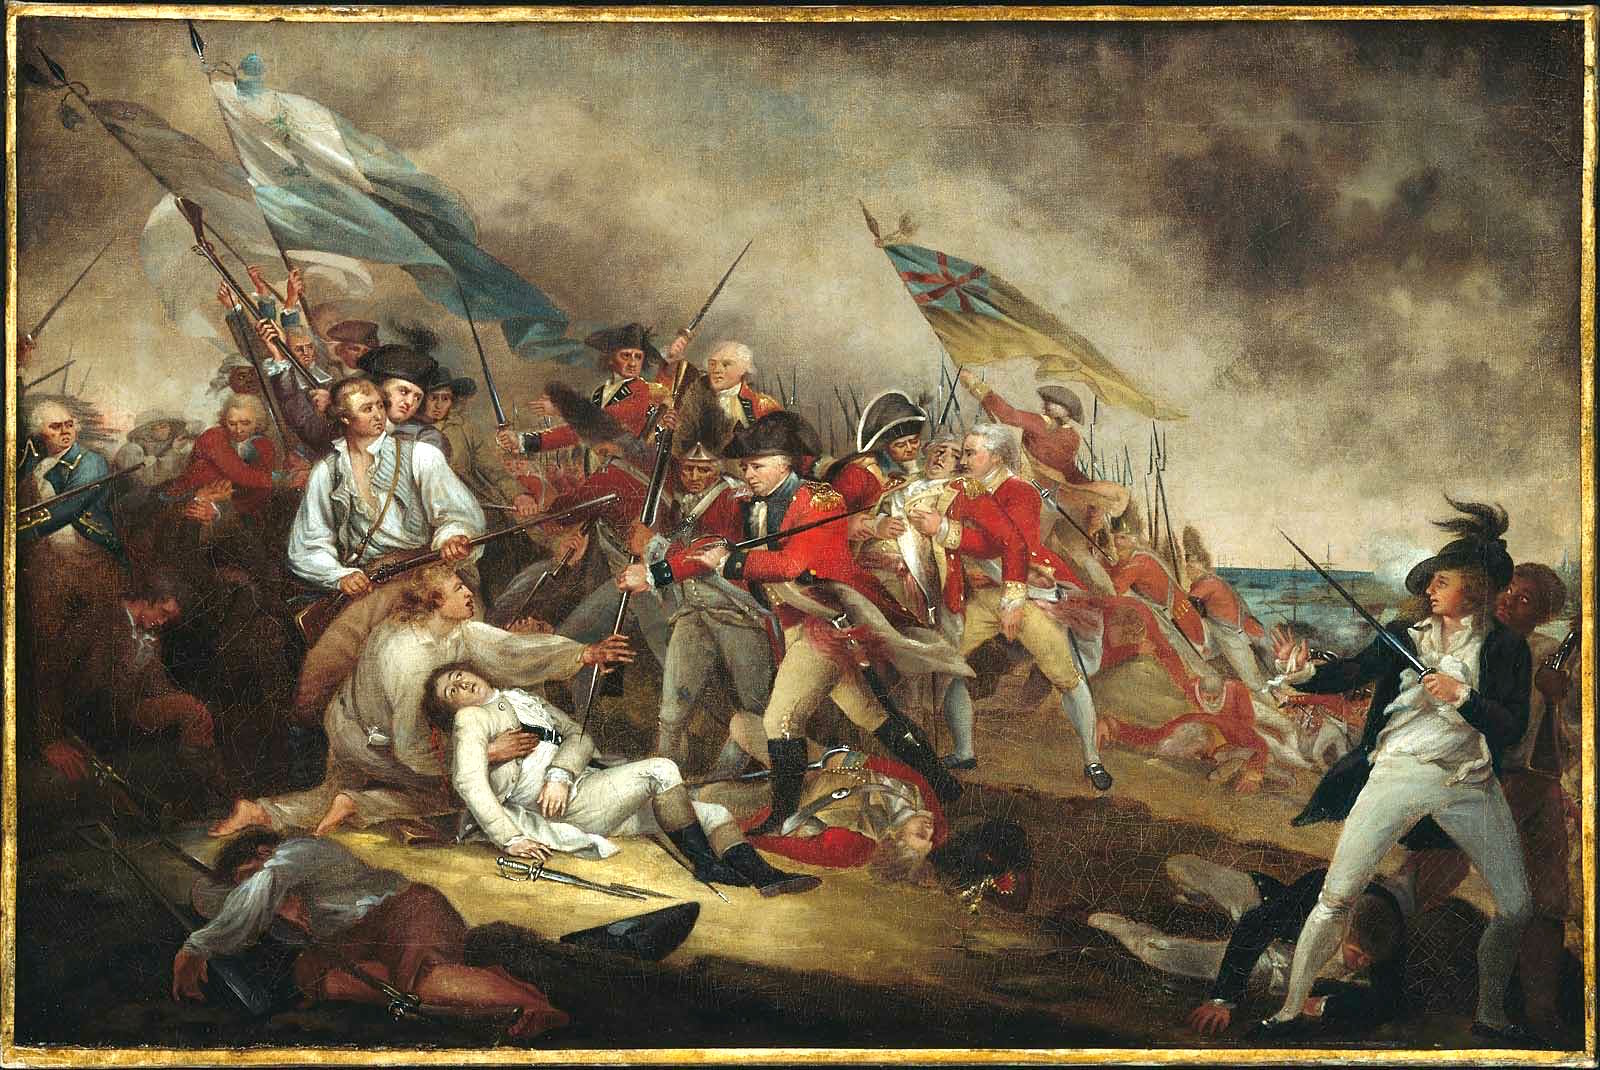 The Death of General Warren at the Battle of Bunkers Hill 01.jpg